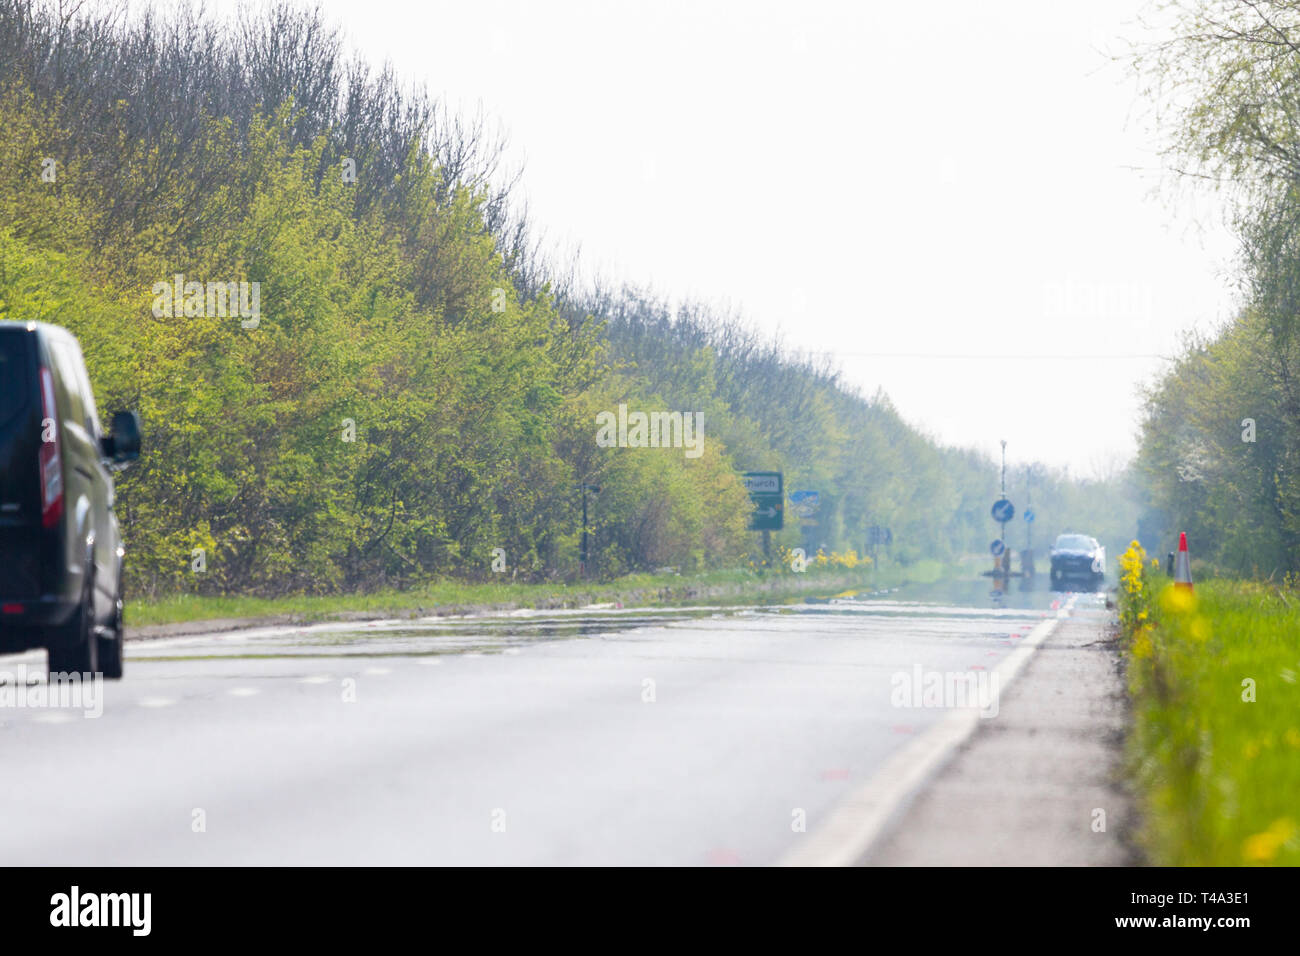 Ashford, Kent, UK. 15th Apr, 2019. UK Weather: Hot and sunny weather on the A259 heading towards Hastings as the hazy hot weather forms a mirage on the asphalt. © Paul Lawrenson 2019, Photo Credit: Paul Lawrenson/ Alamy Live News Stock Photo